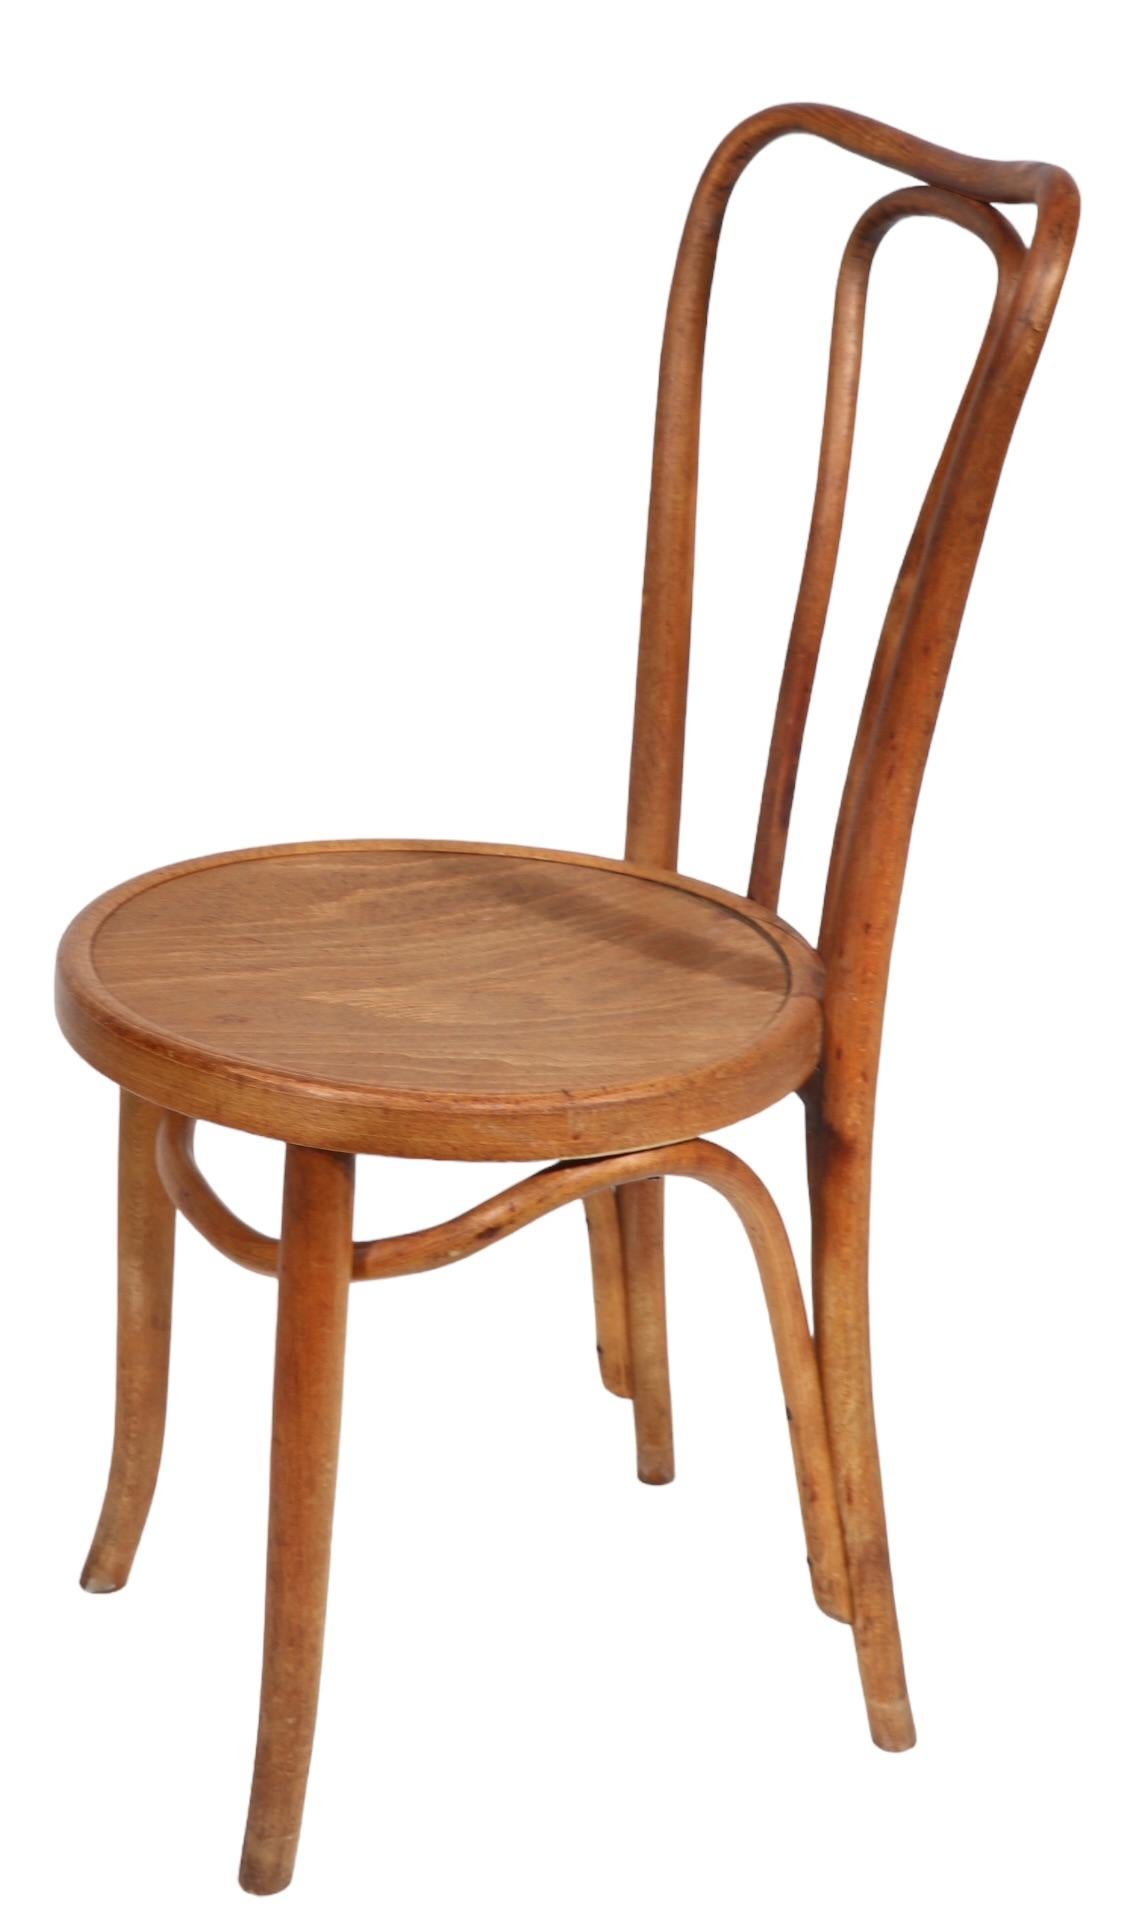 Vienna Secessionist Bentwood Chairs att. to Thonet  Made in Poland 3 available  10